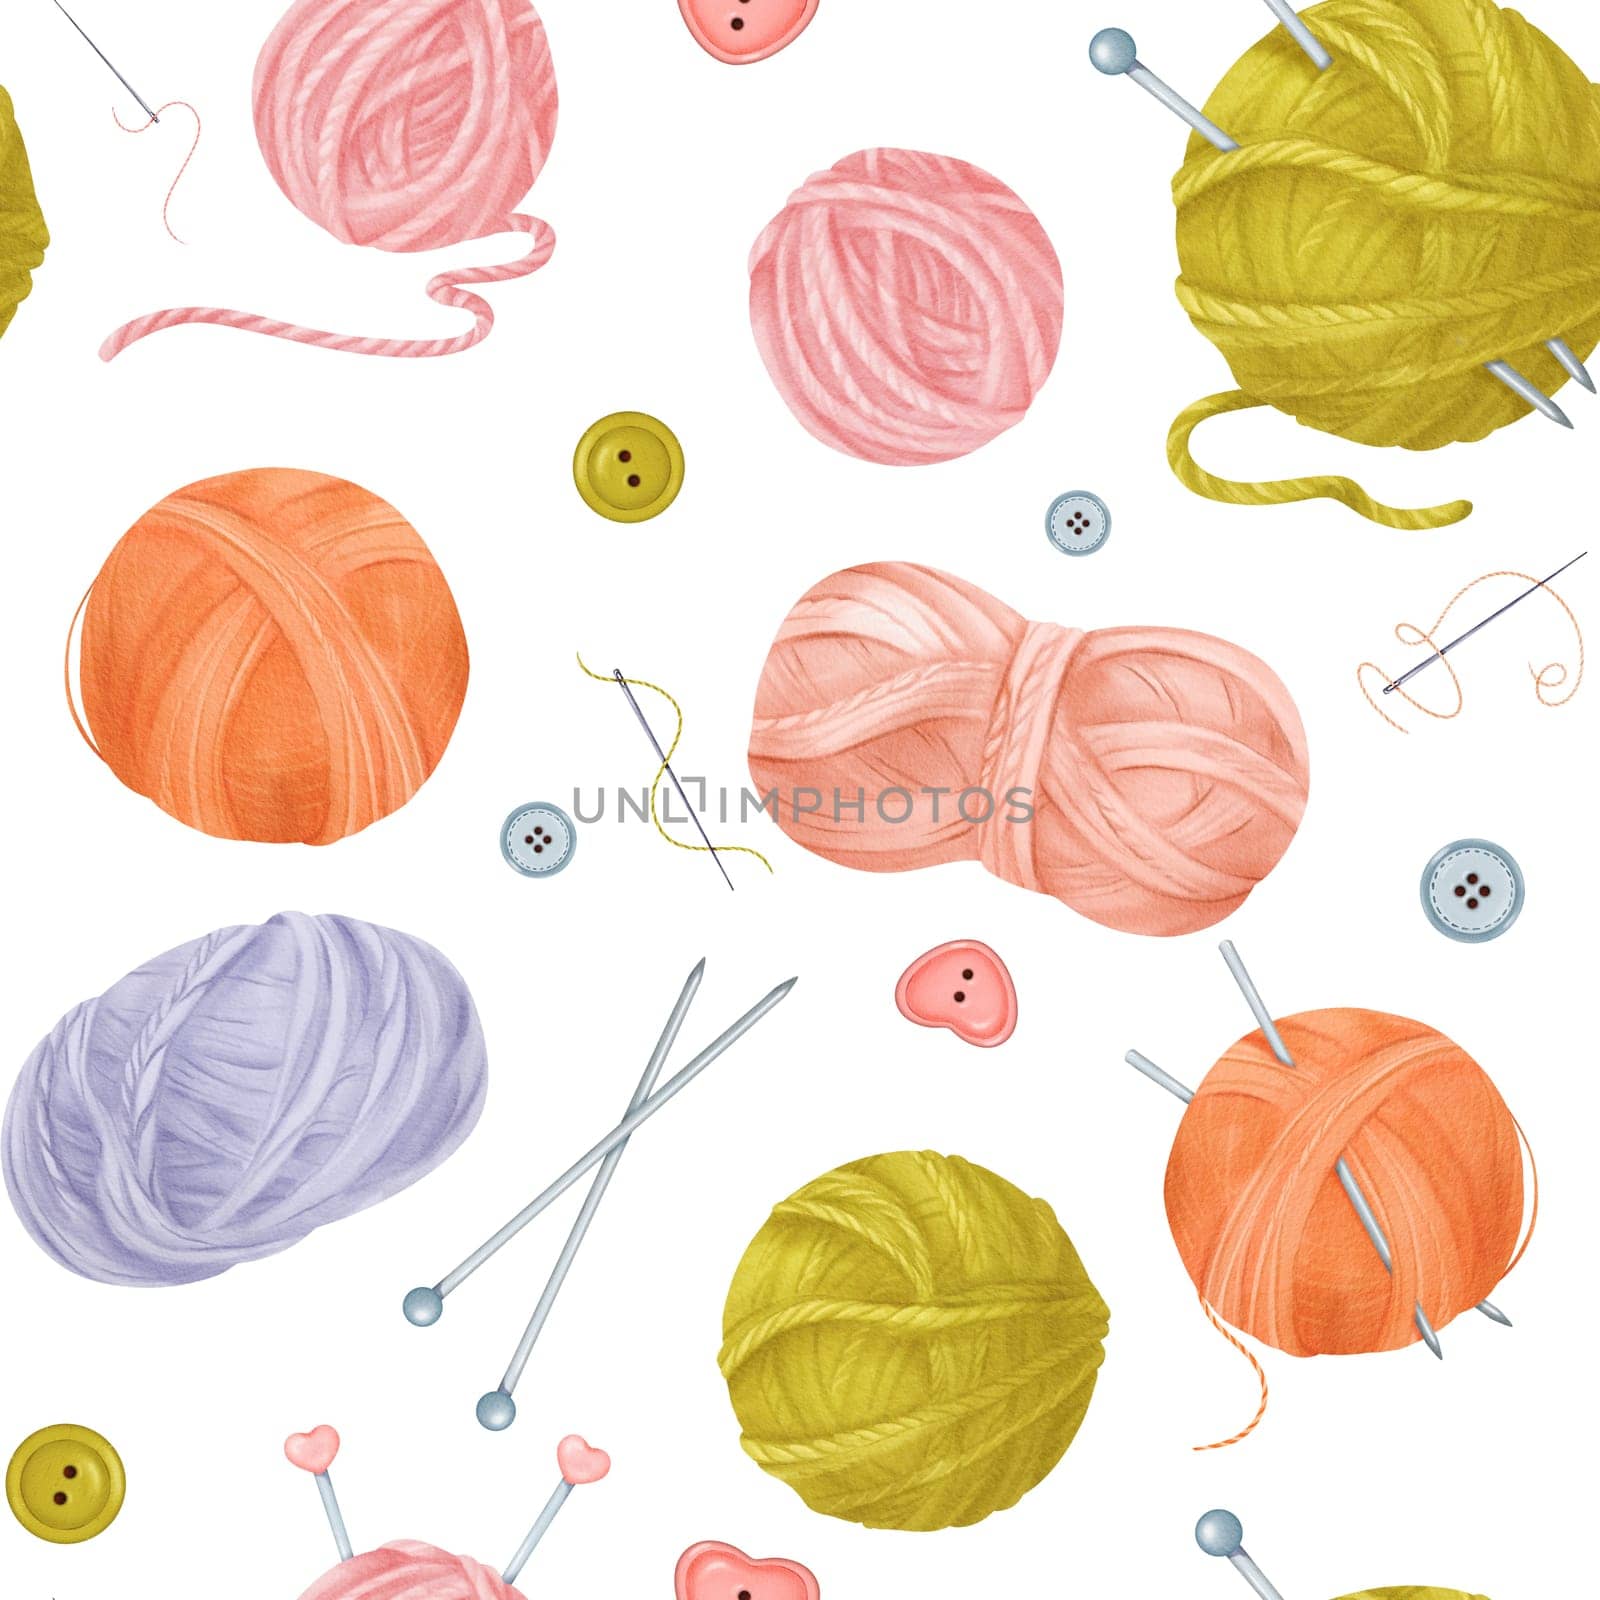 A seamless crafting-themed pattern featuring yarn skeins, colorful buttons, sewing needles with threads, and knitting needles. watercolor for textile design crafting projects.